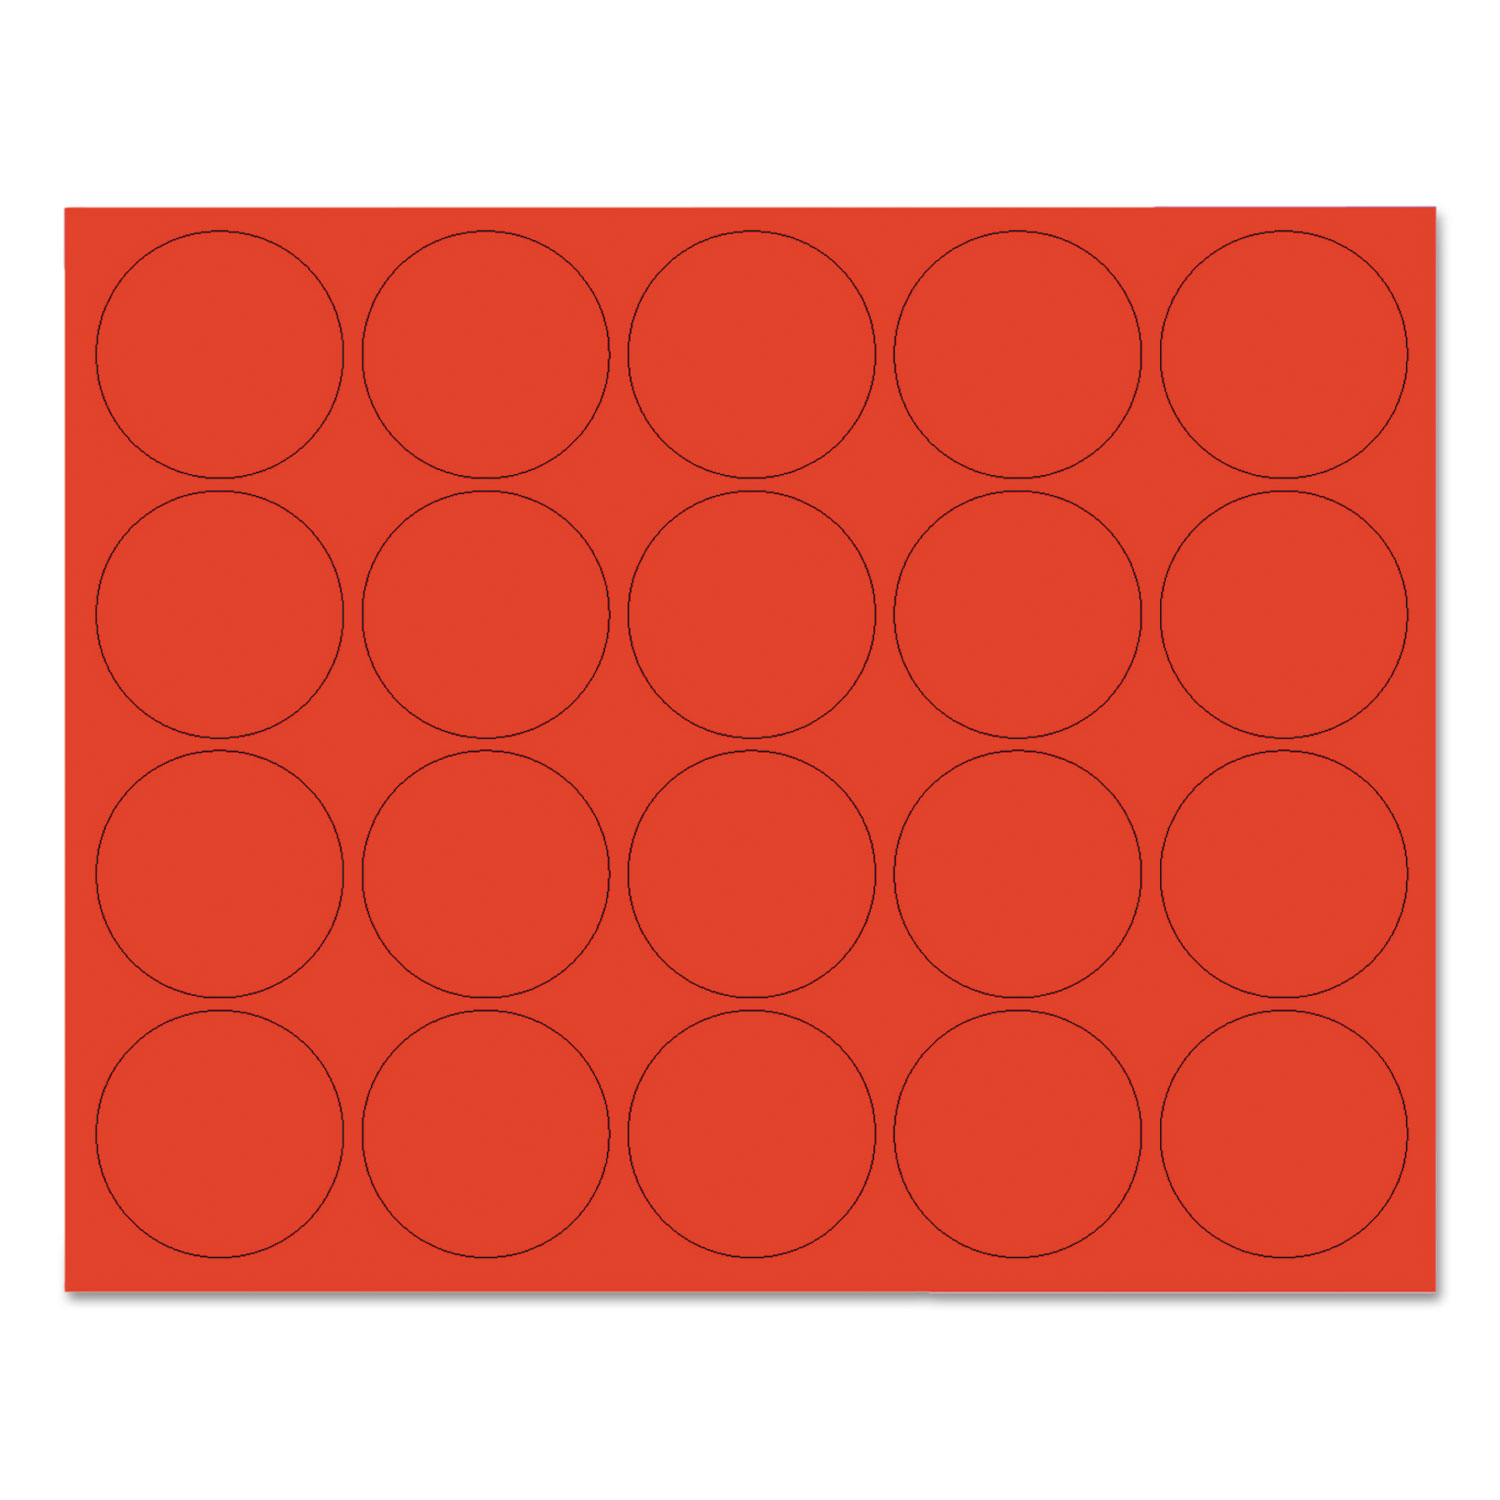  MasterVision FM1604 Interchangeable Magnetic Board Accessories, Circles, Red, 3/4, 20/Pack (BVCFM1604) 